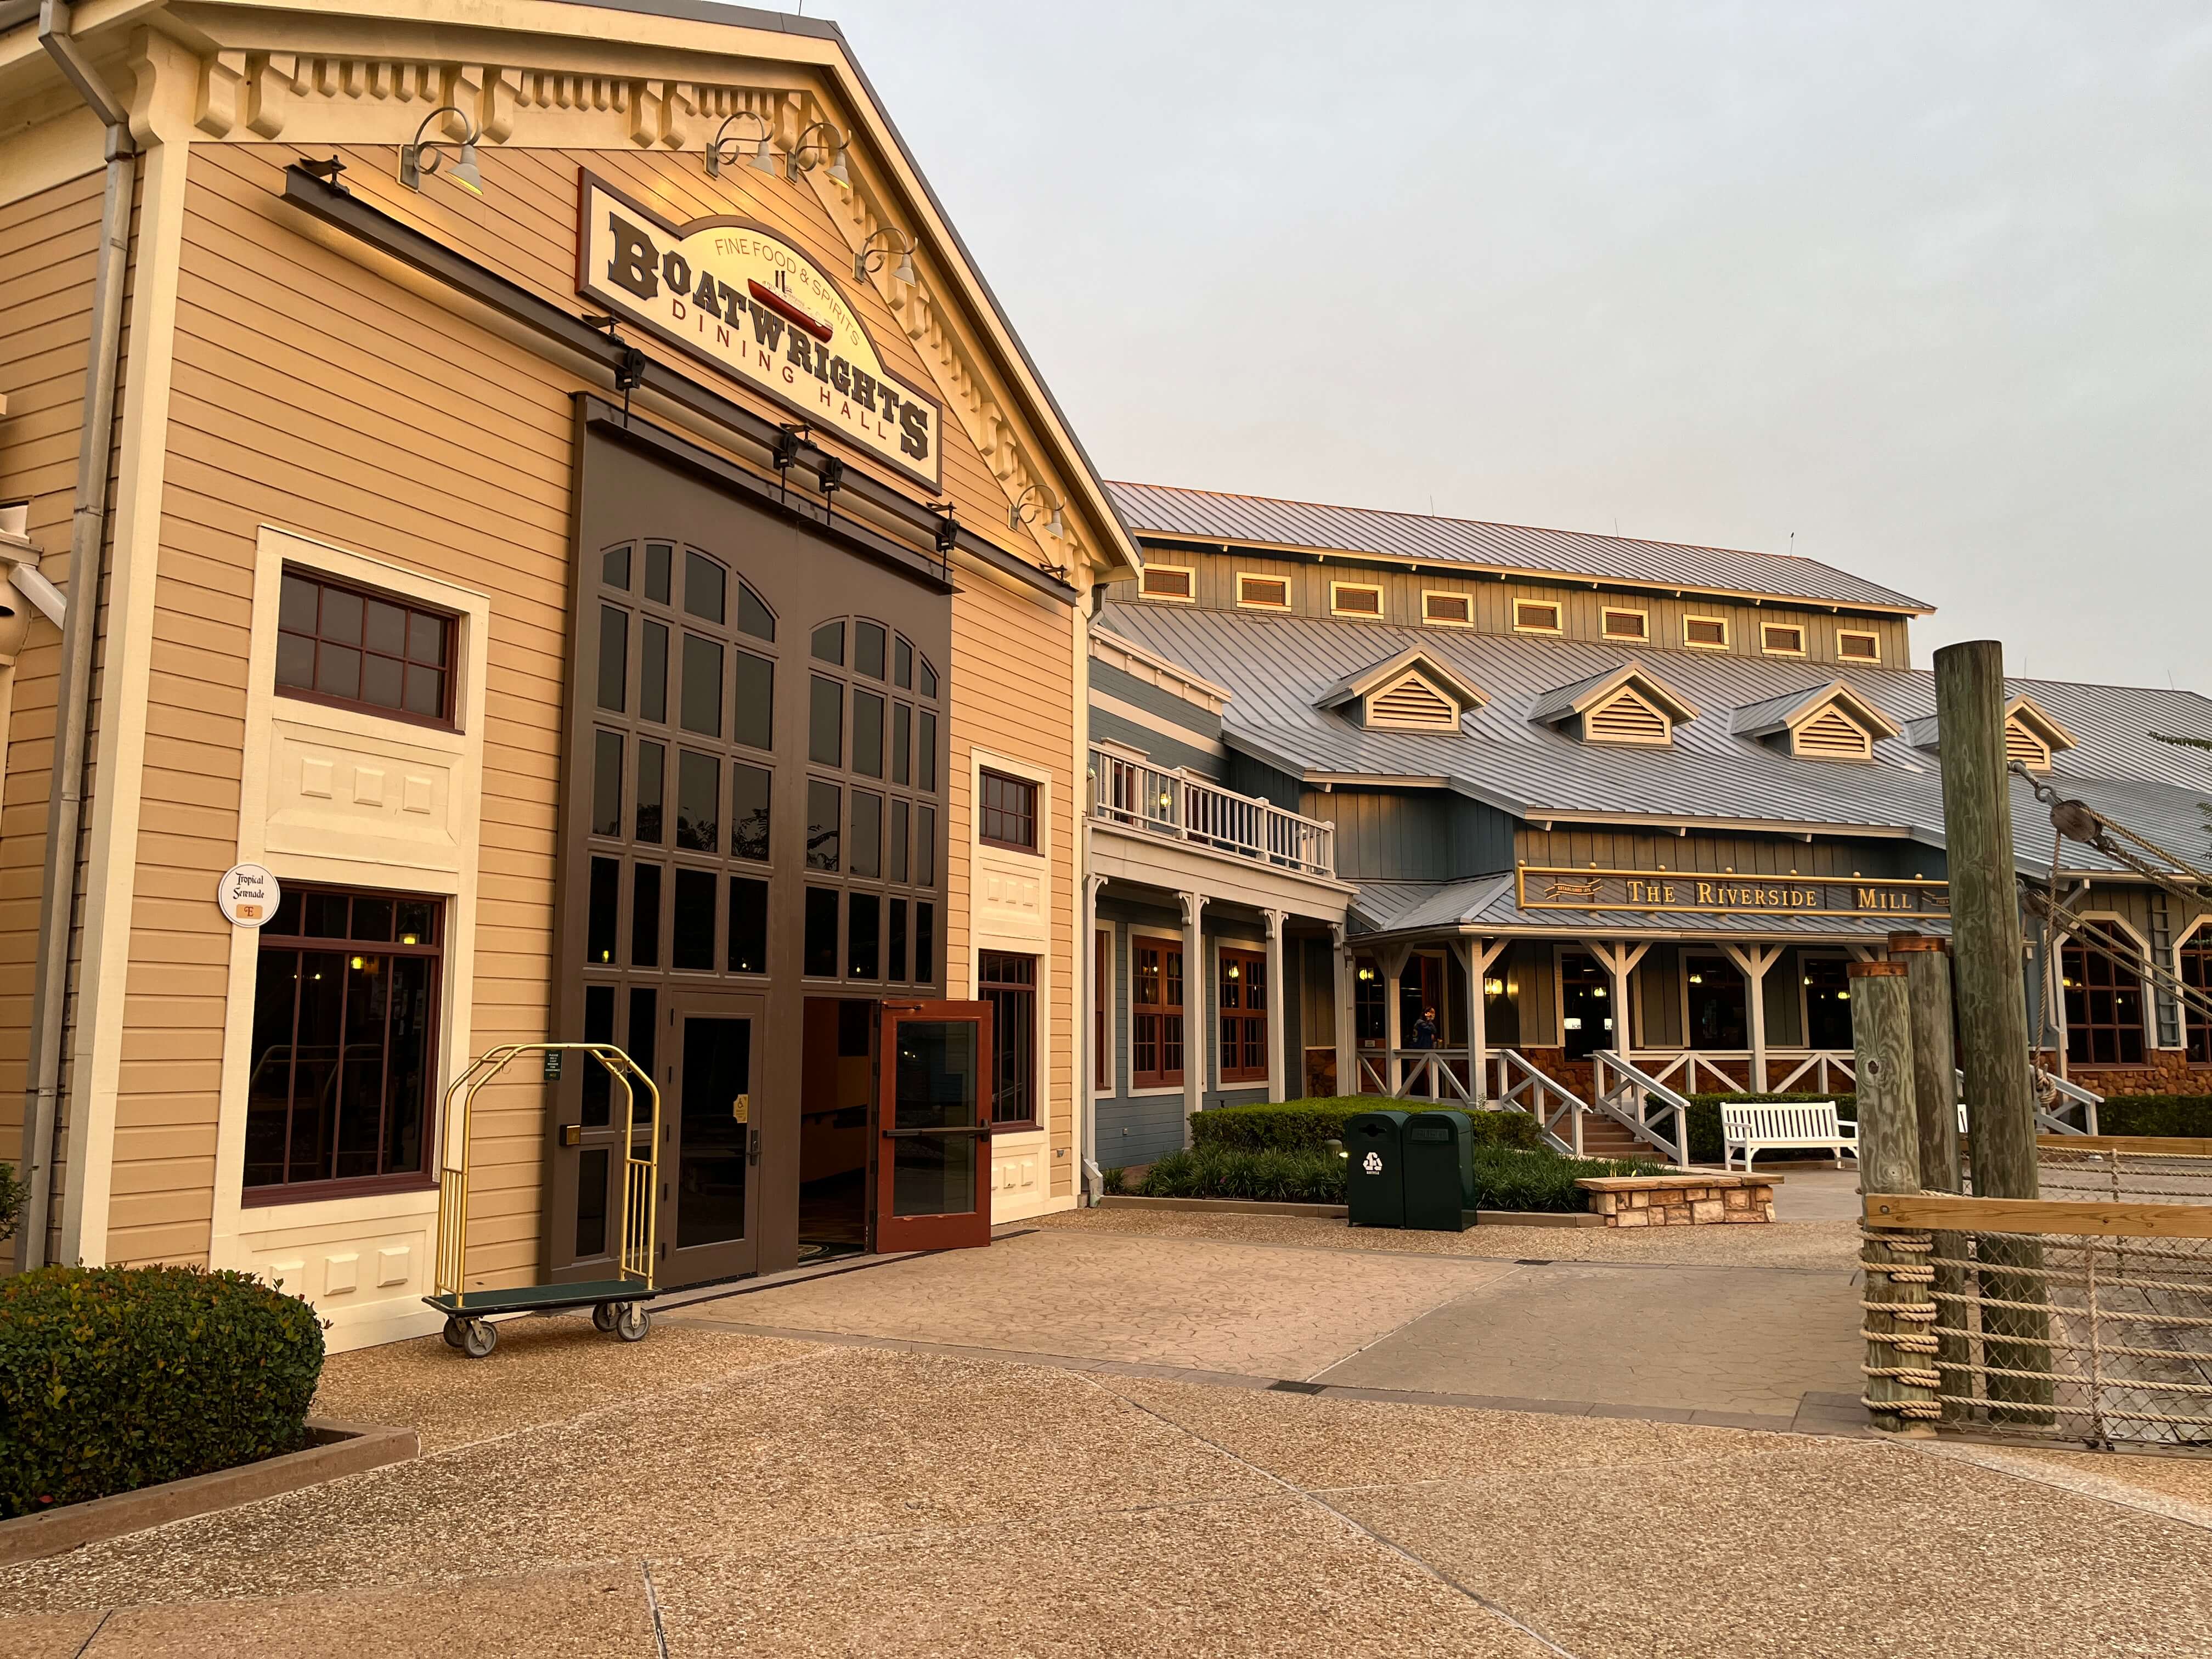 the exterior of Boatwrights, the table-service restaurant at Port Orleans Riverside Resort